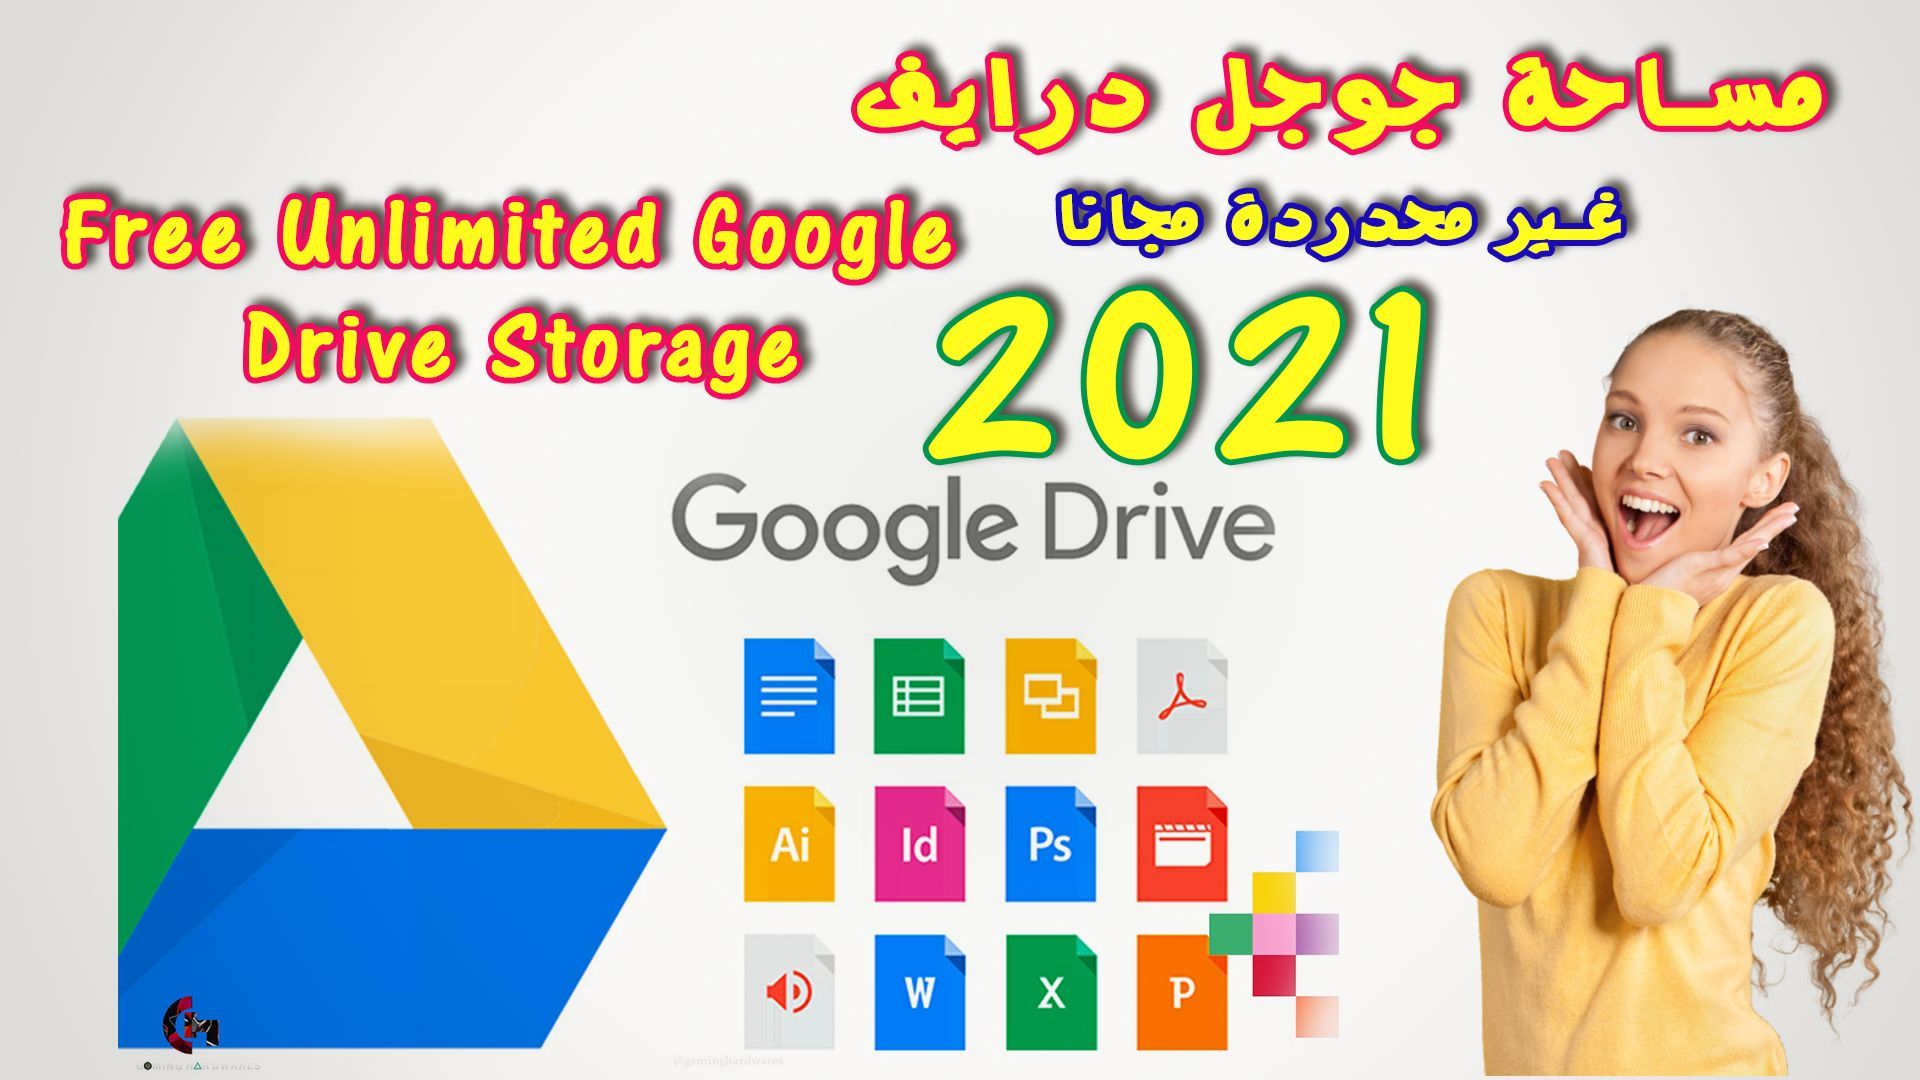 Unlimited Google Drive Team Drive for your one Google account. 6 